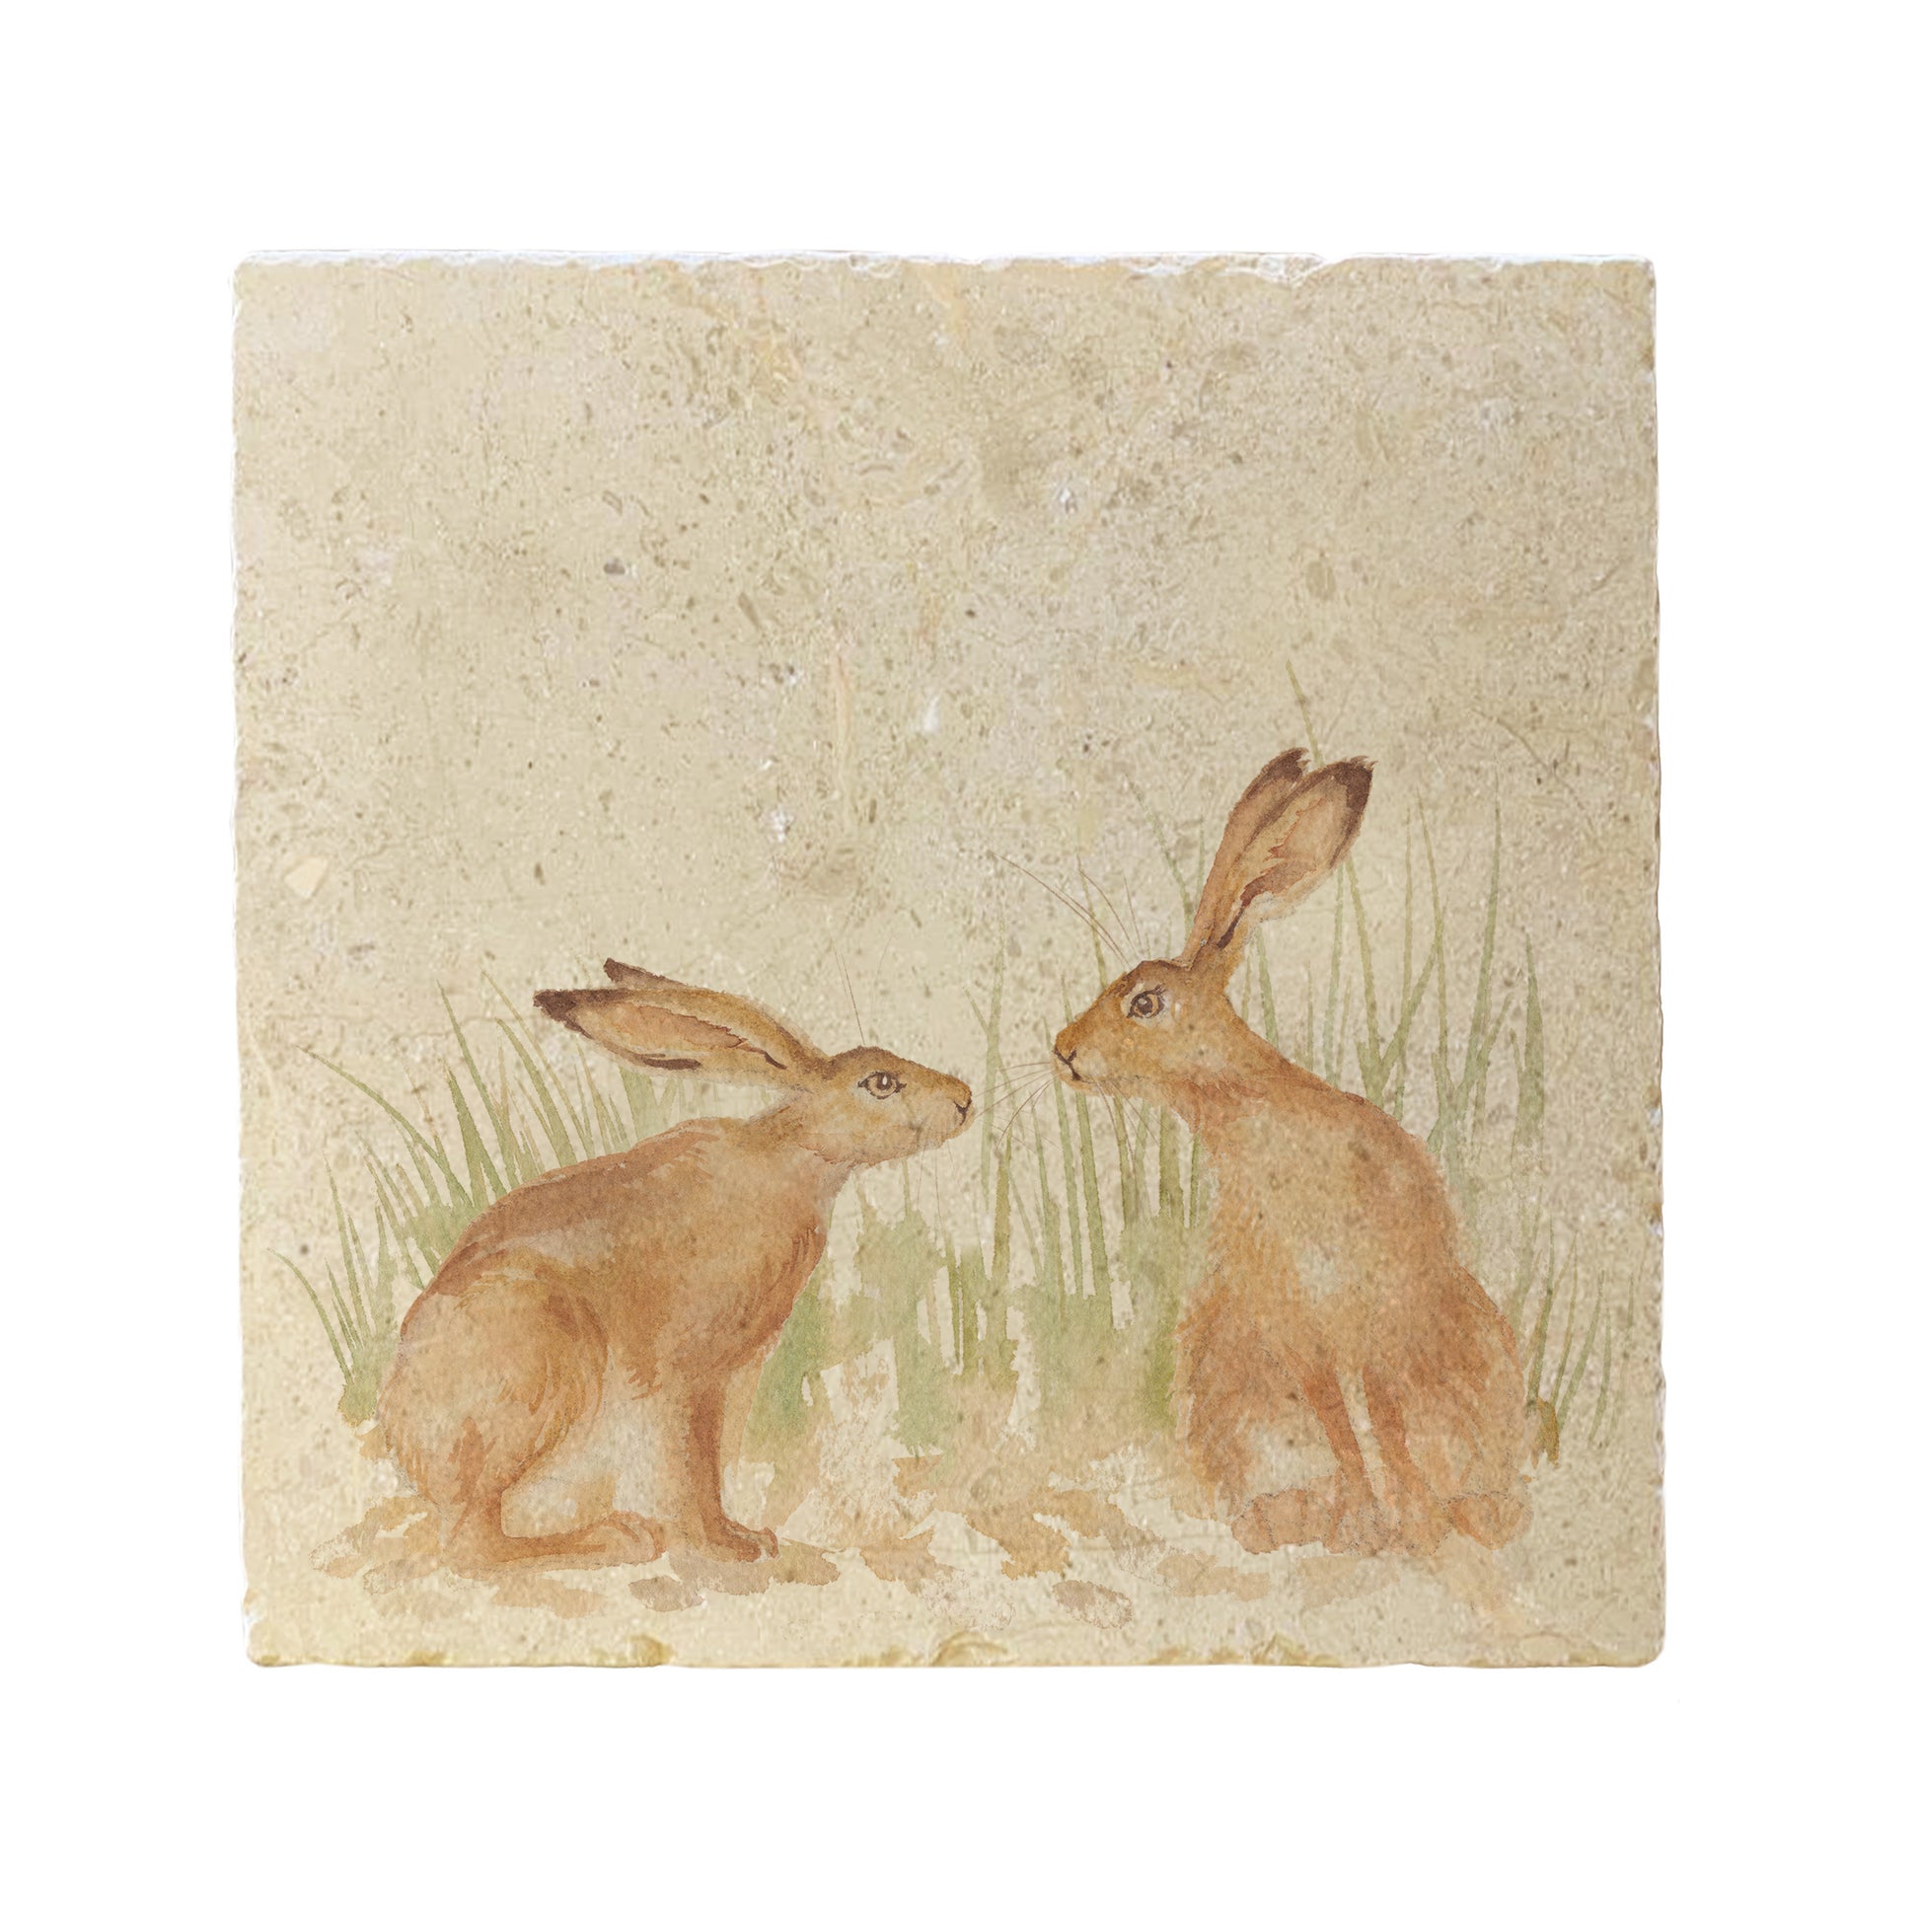 A handmade square cream marble splashback tile featuring a watercolour countryside animal design of two hares in grass facing each other about to touch noses.